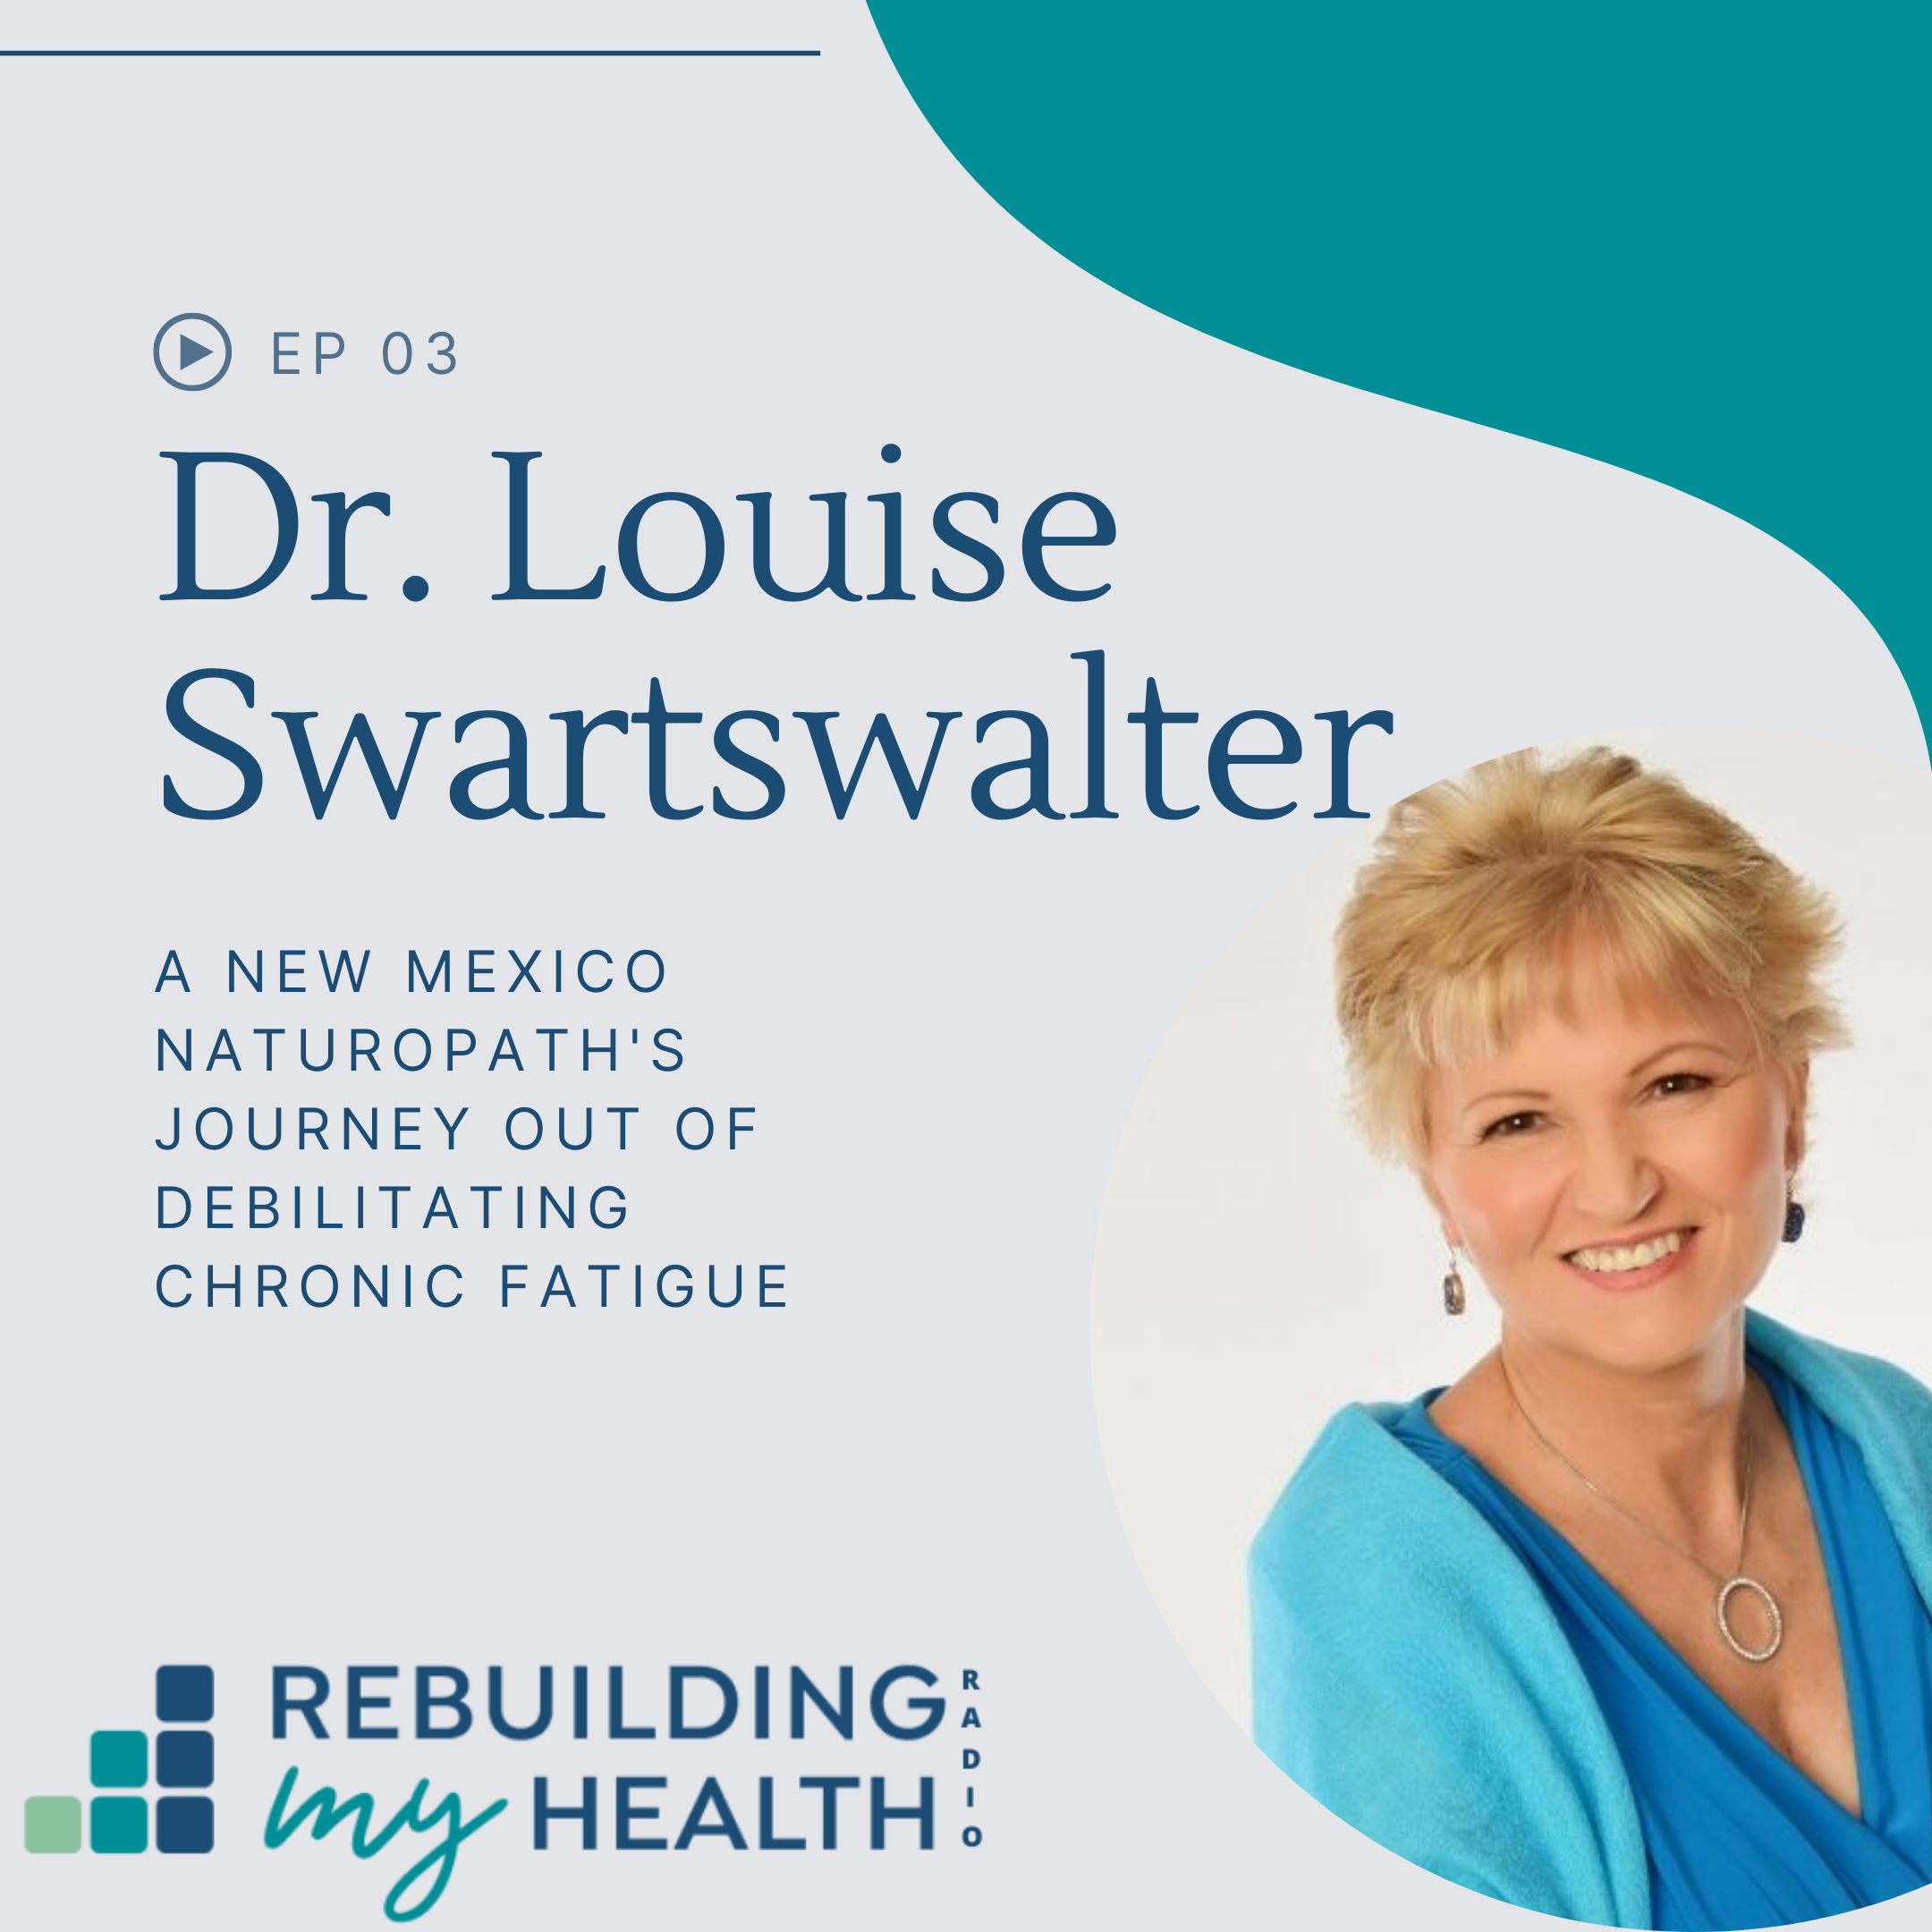 Learn how Louise Swartswalter stopped chronic fatigue by removing mercury fillings, detoxing, cleaning up her diet and environment, and healing emotional trauma and blocks.